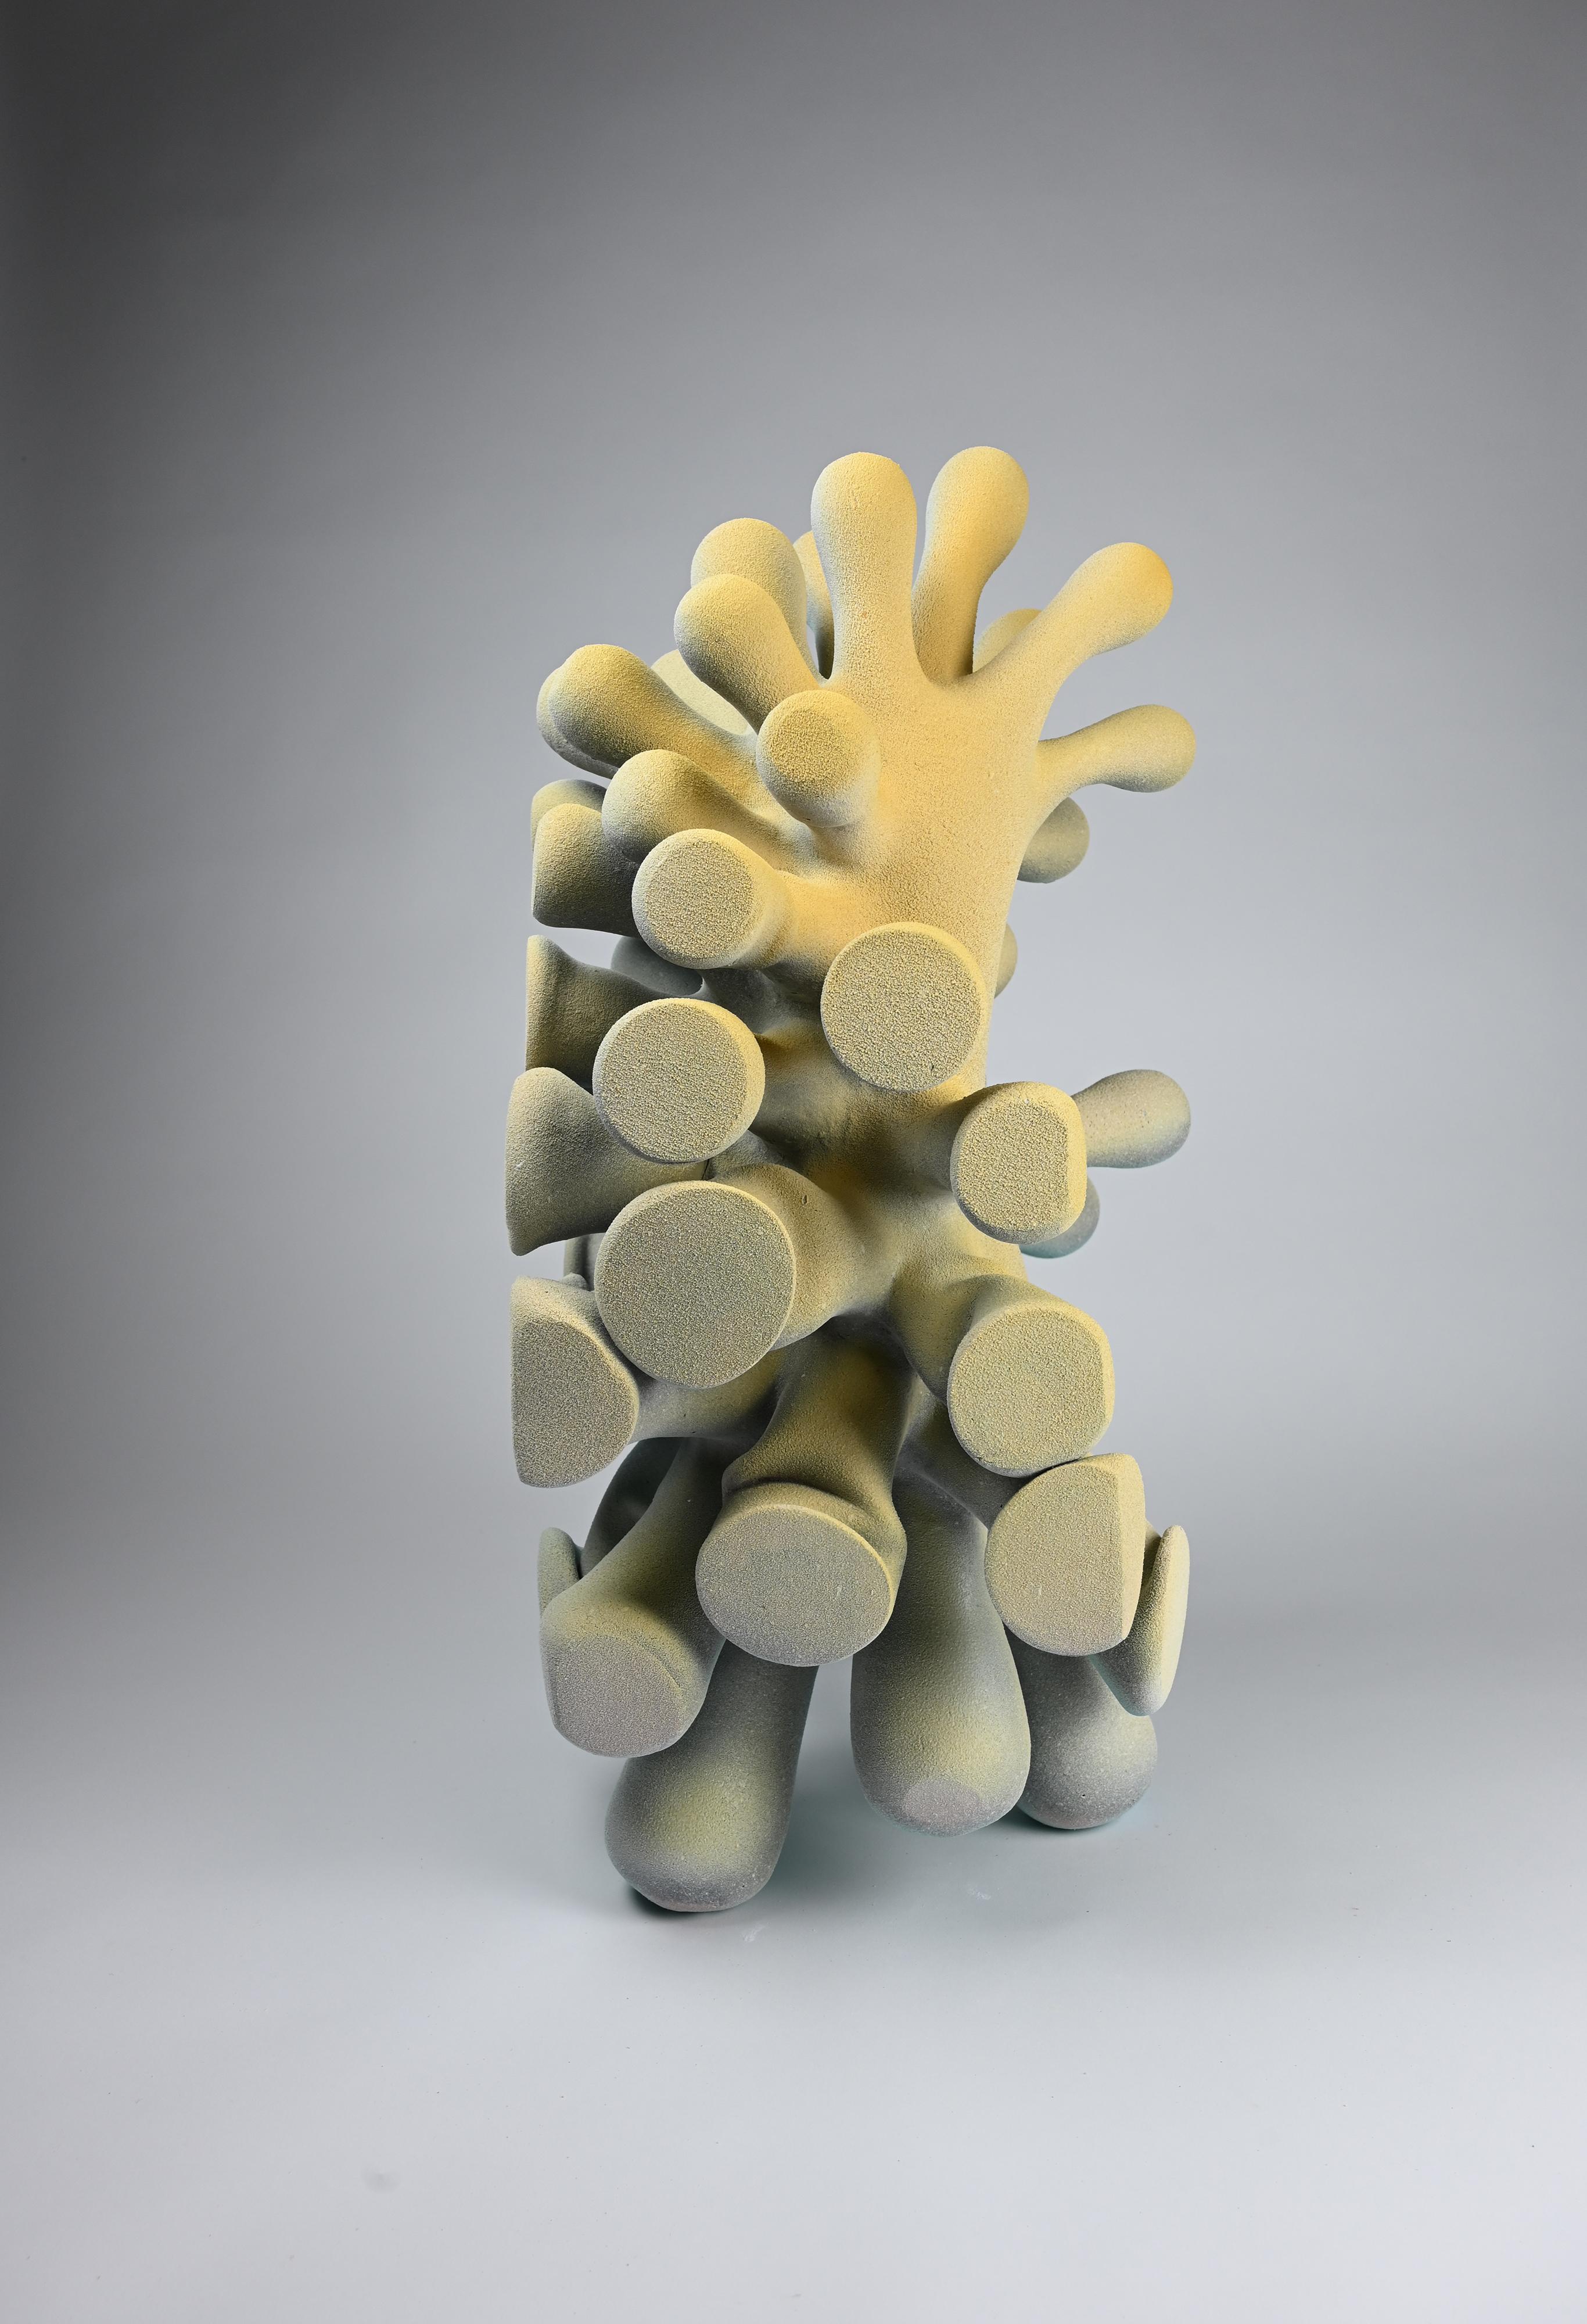 Undoing the Squishy, 2022 (Ceramic, C. 25.5 in. h x 15 in. w x 11.8 in. d, Object No.: 4015)

Toni Losey’s work hums with an underlying current of rhythm and organization.  The repetition found on the wheel influences her work as Losey intuitively